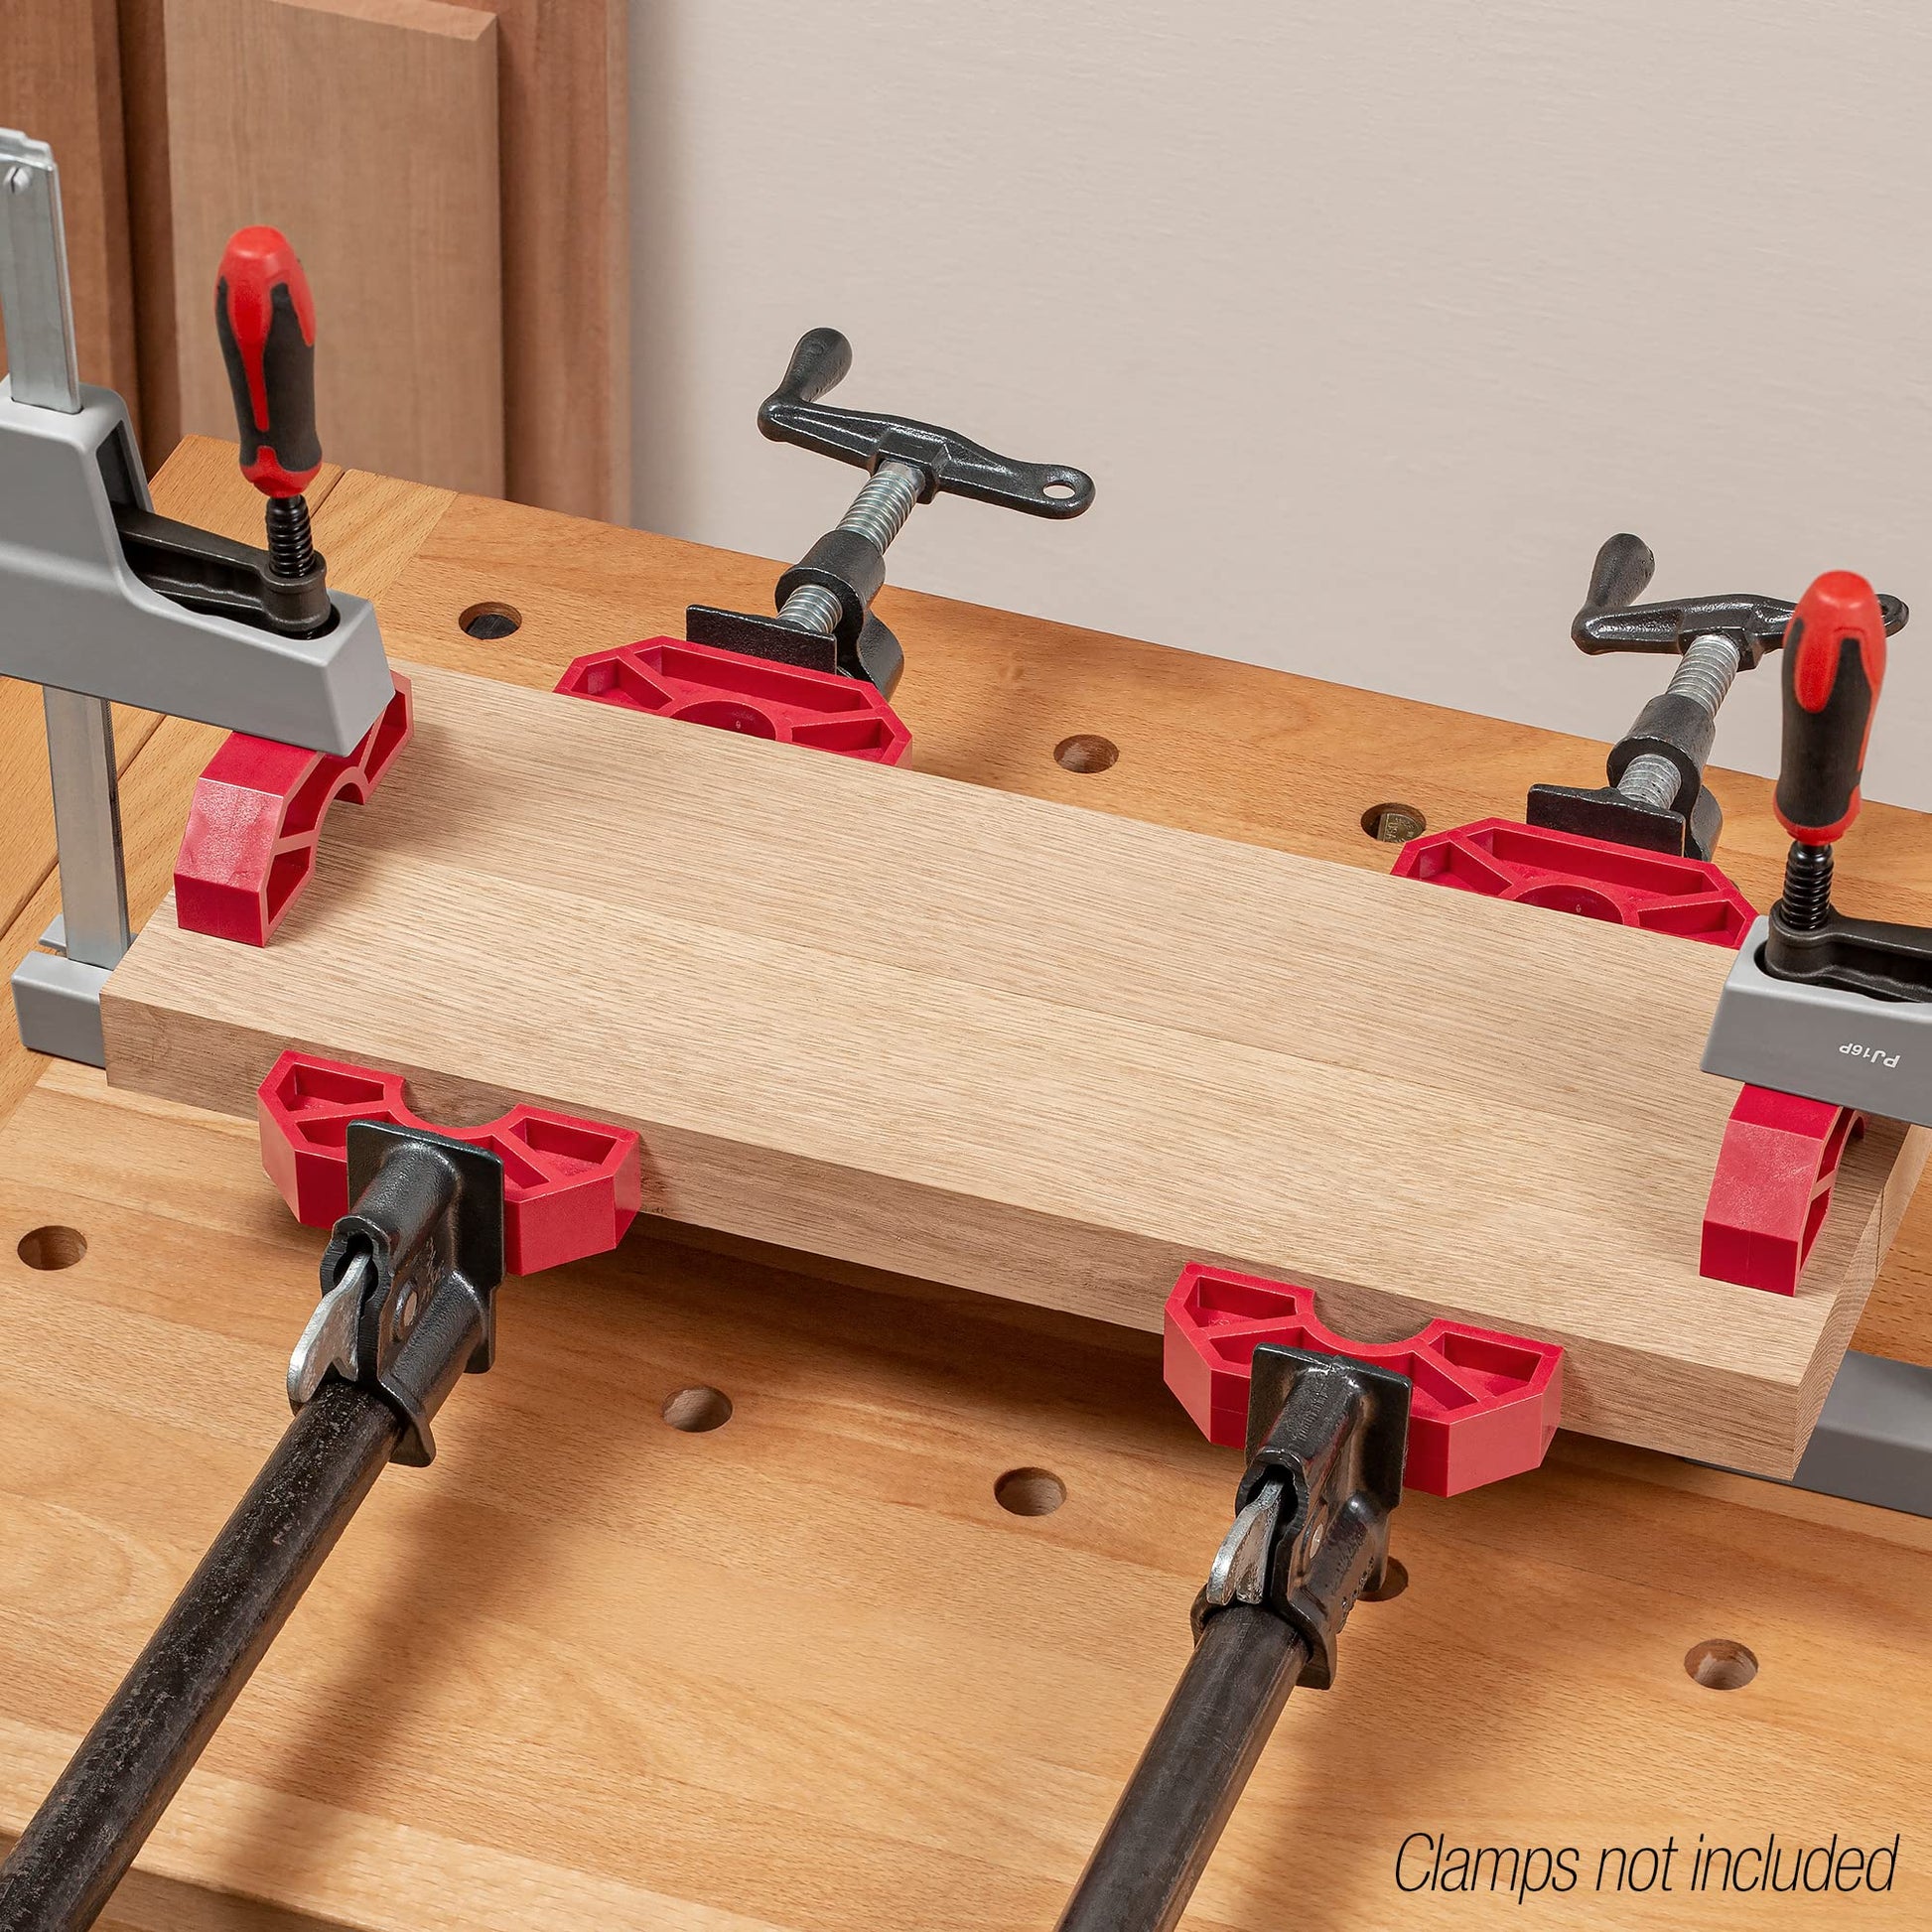 Sale on Woodpeckers Miter Clamp Sets